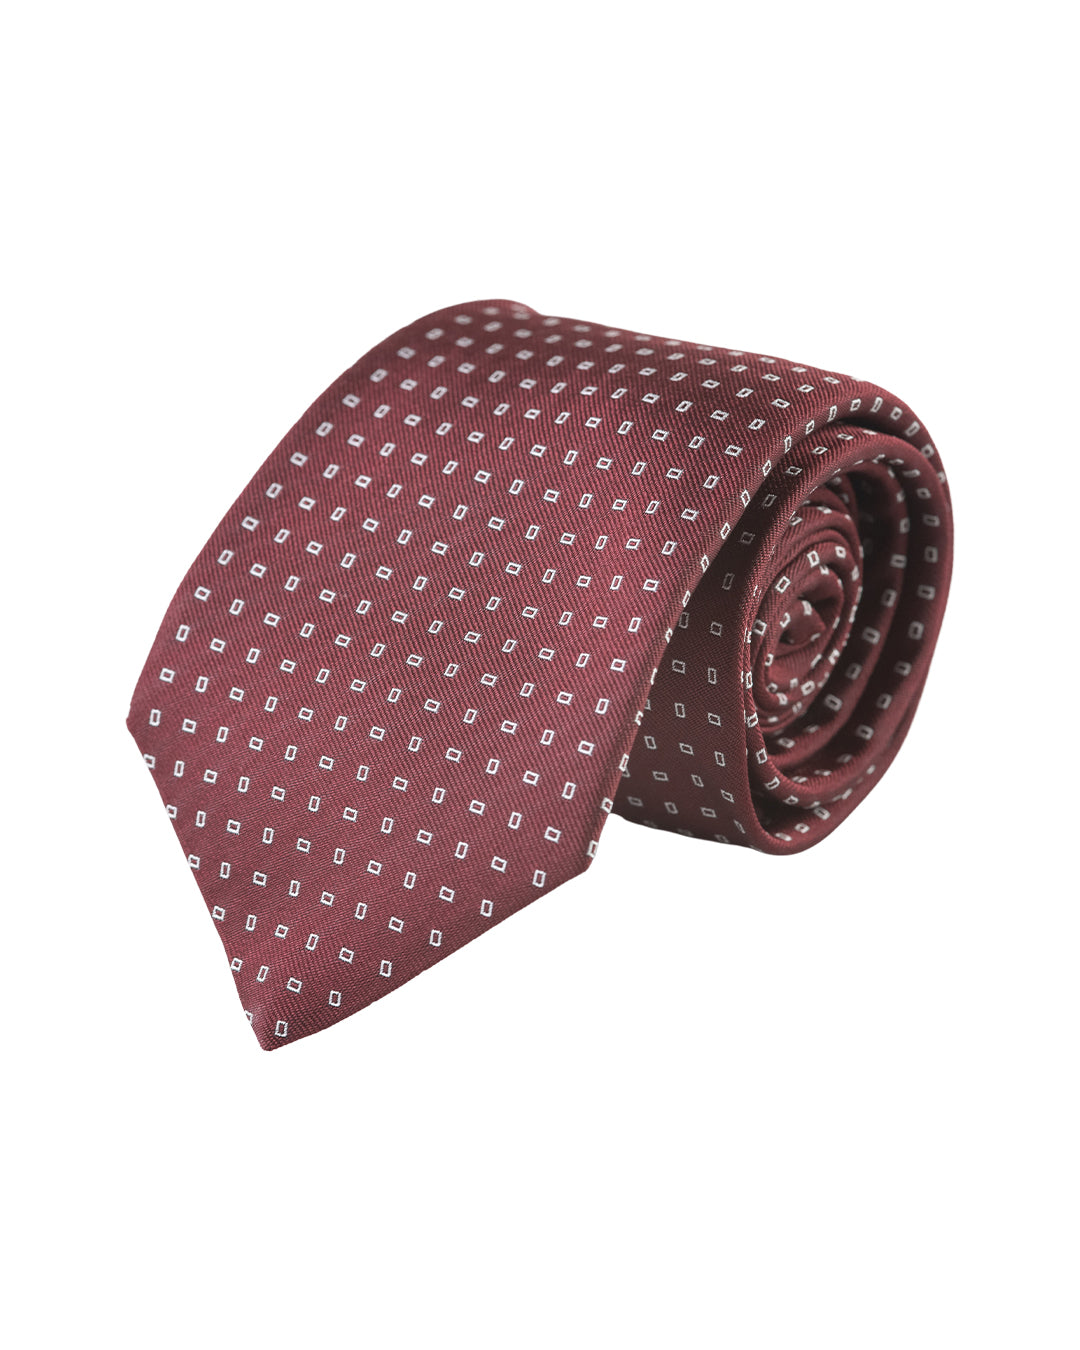 Burgundy Tie With Small Rectangles